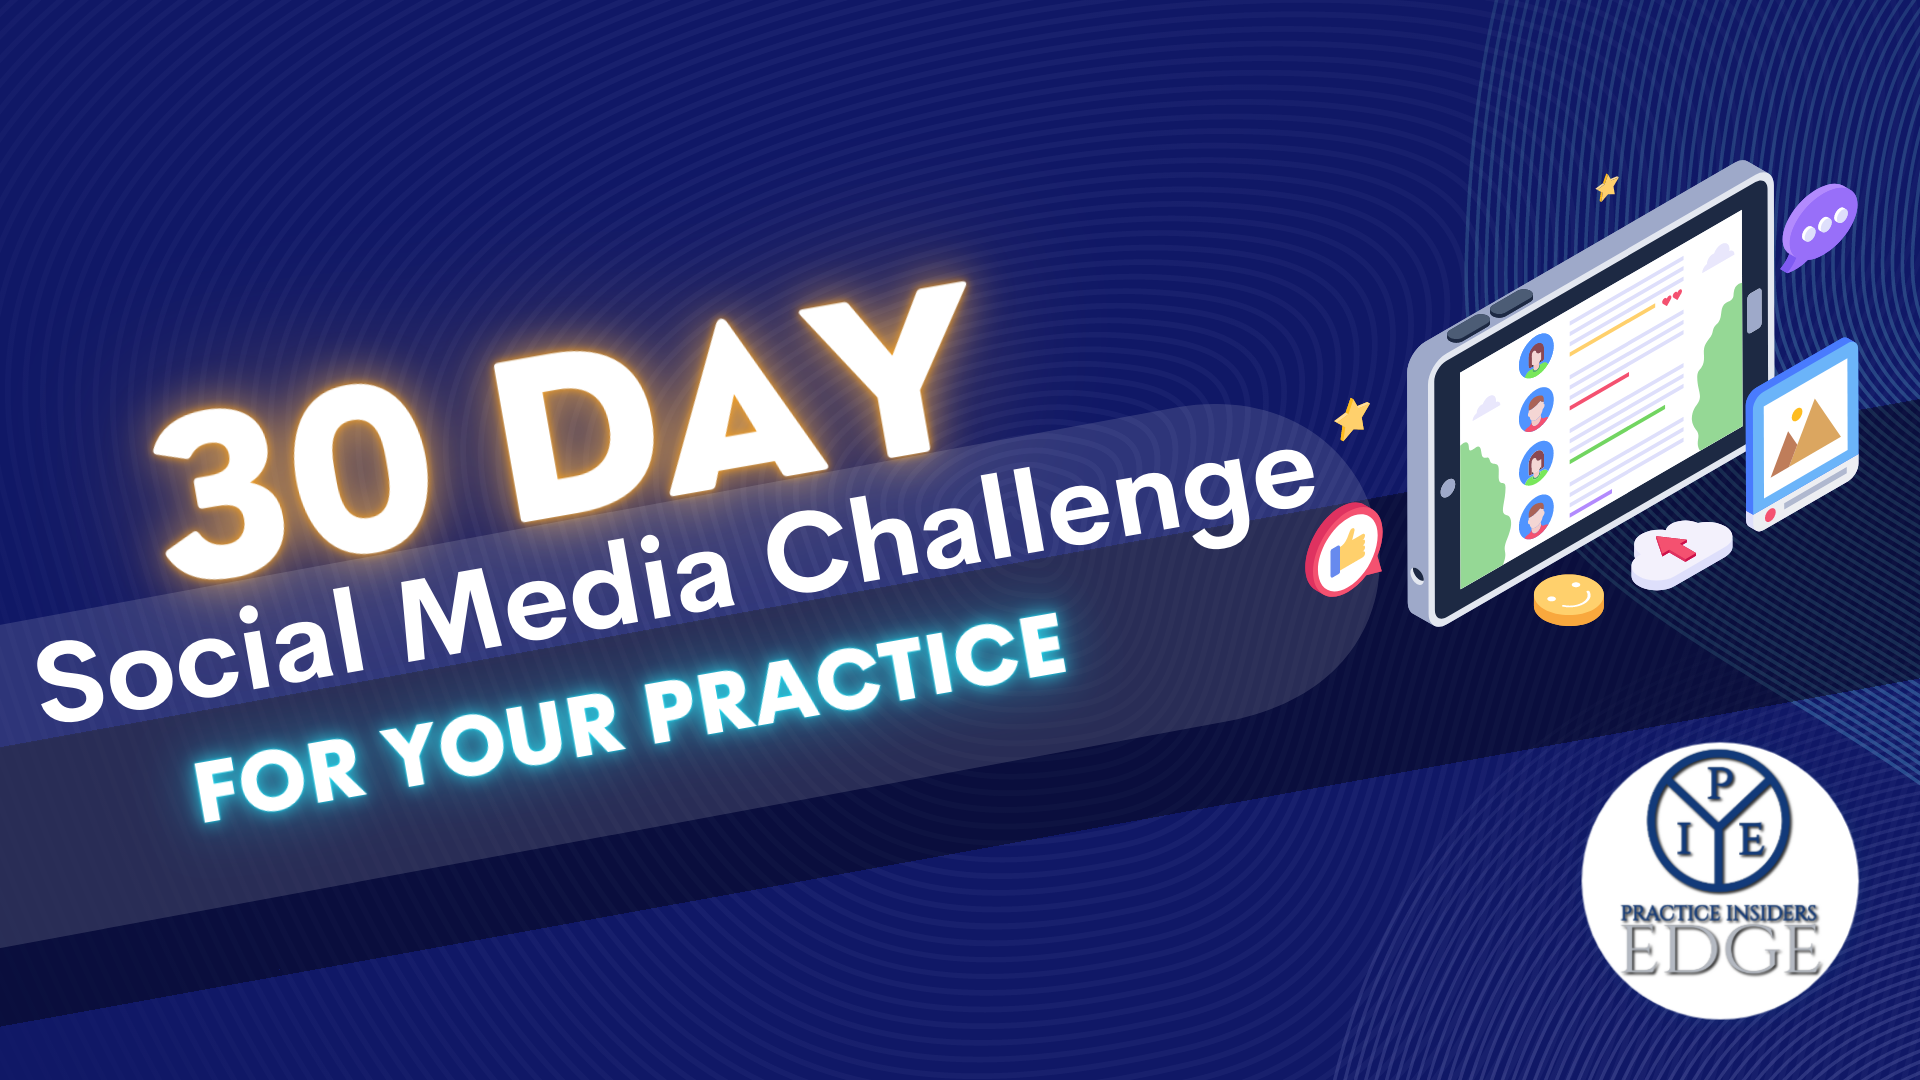 30 Day Social Media Challenge For Your Practice